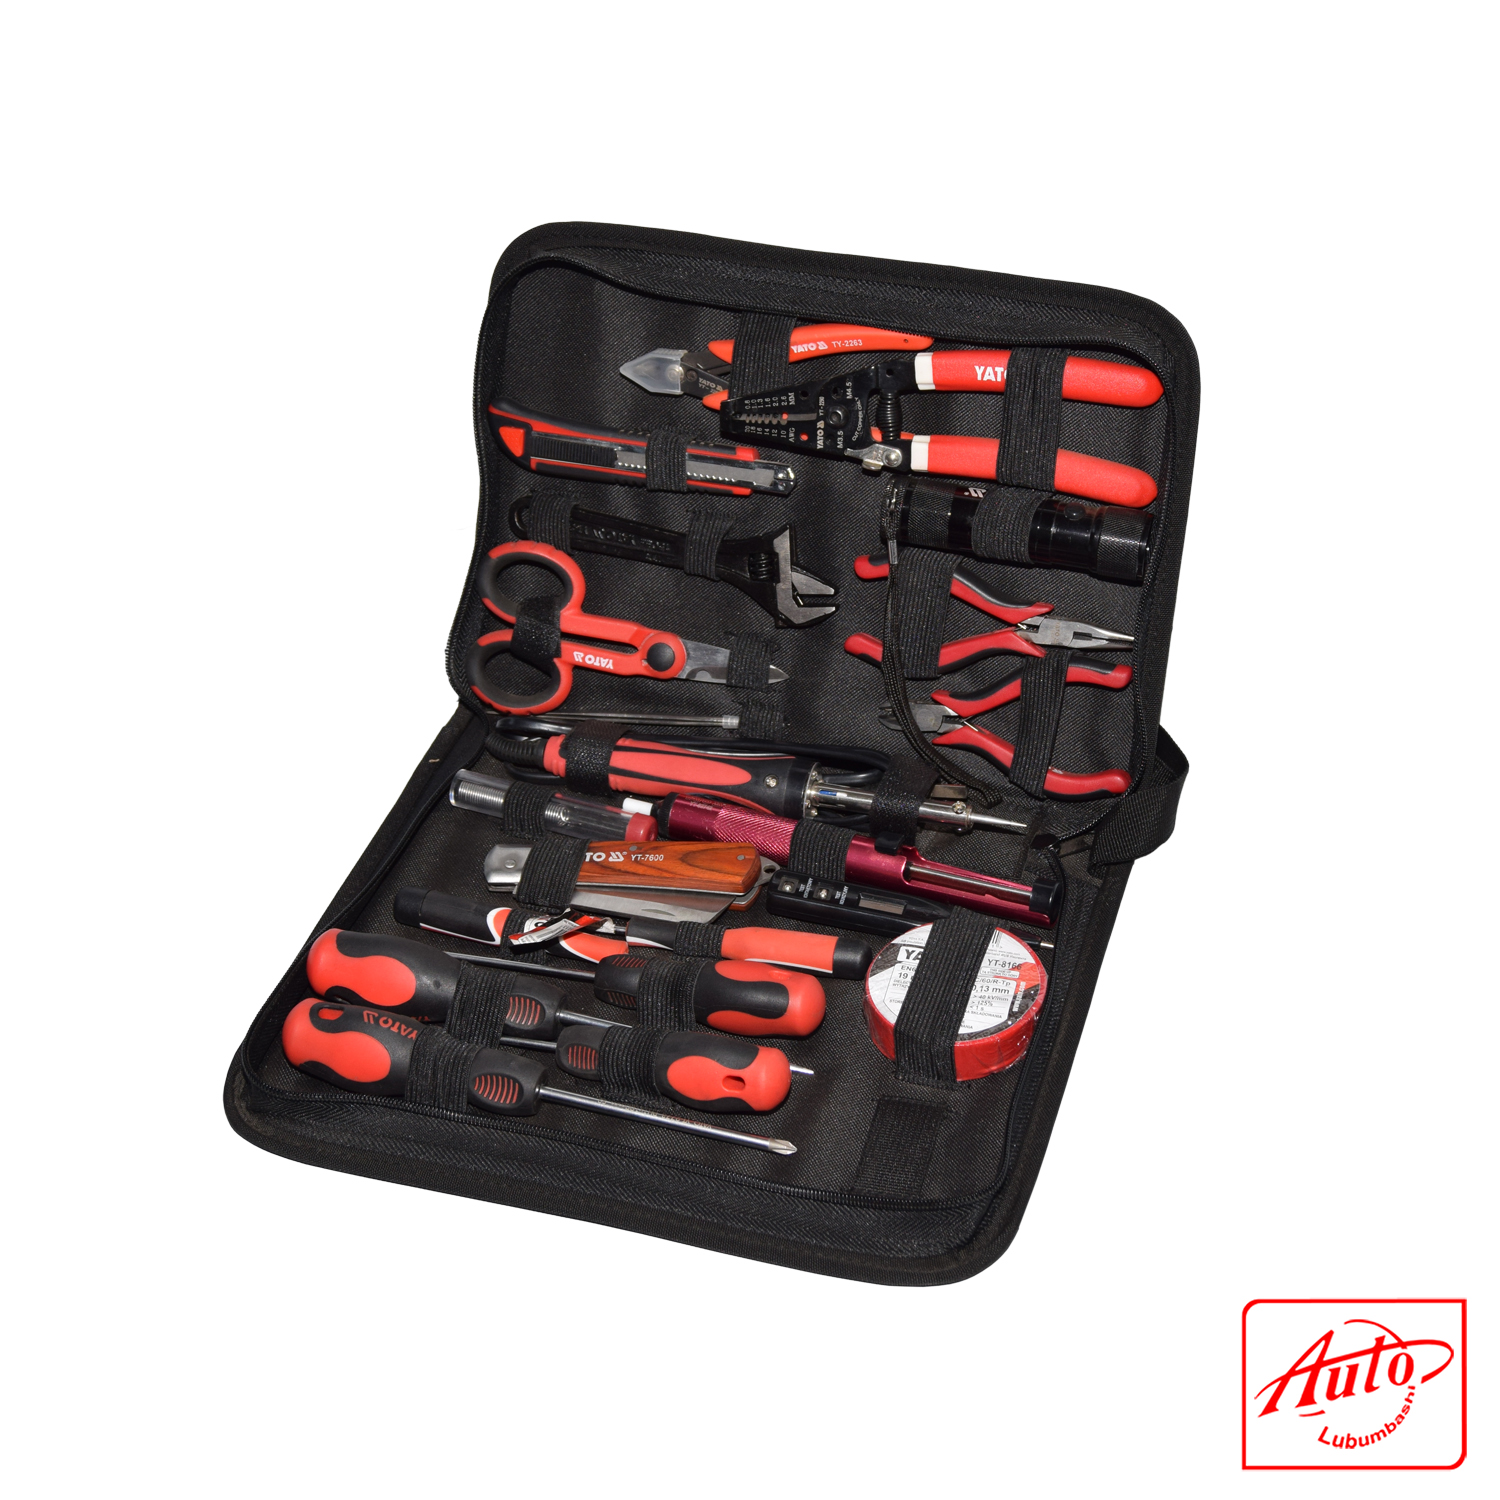 ELECTRICIAN TOOL SET 13PCS IN POUCH – YATO – Auto Lubumbashi